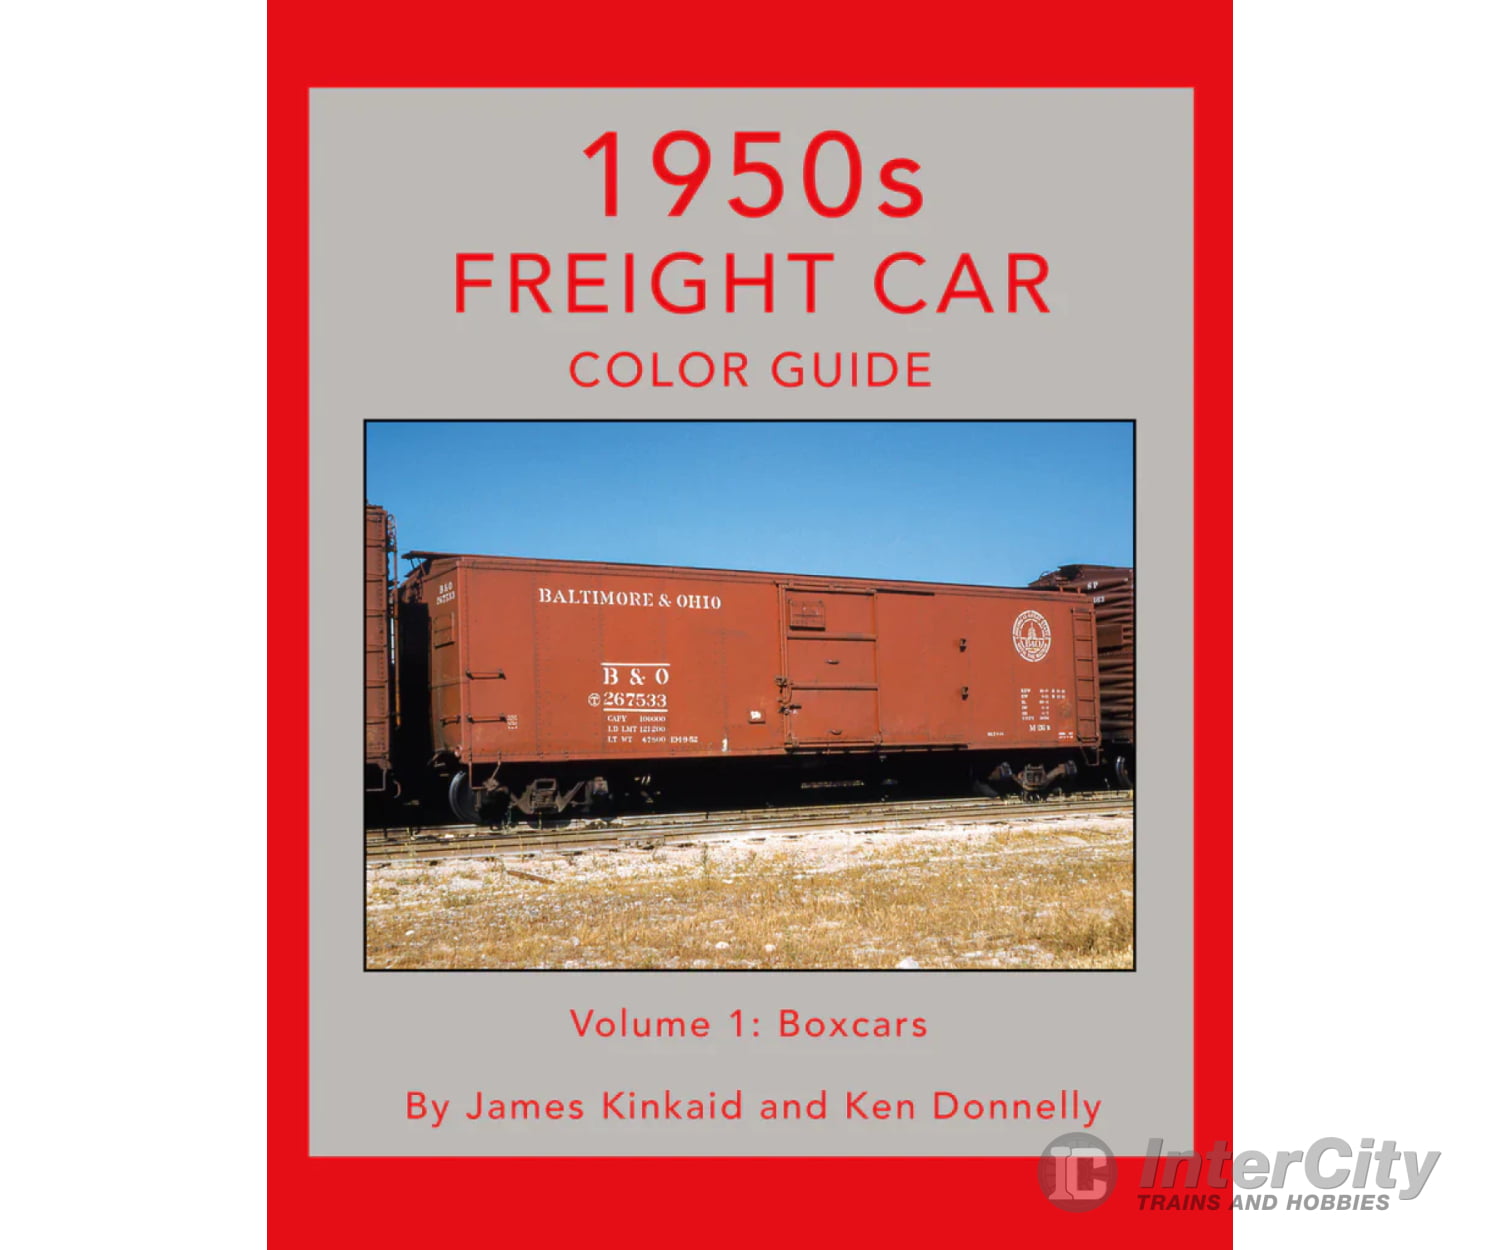 1950S Freight Car Color Guide Volume 1 By Janes And Ken Kinkaid & Donnelly Morning Sun Books